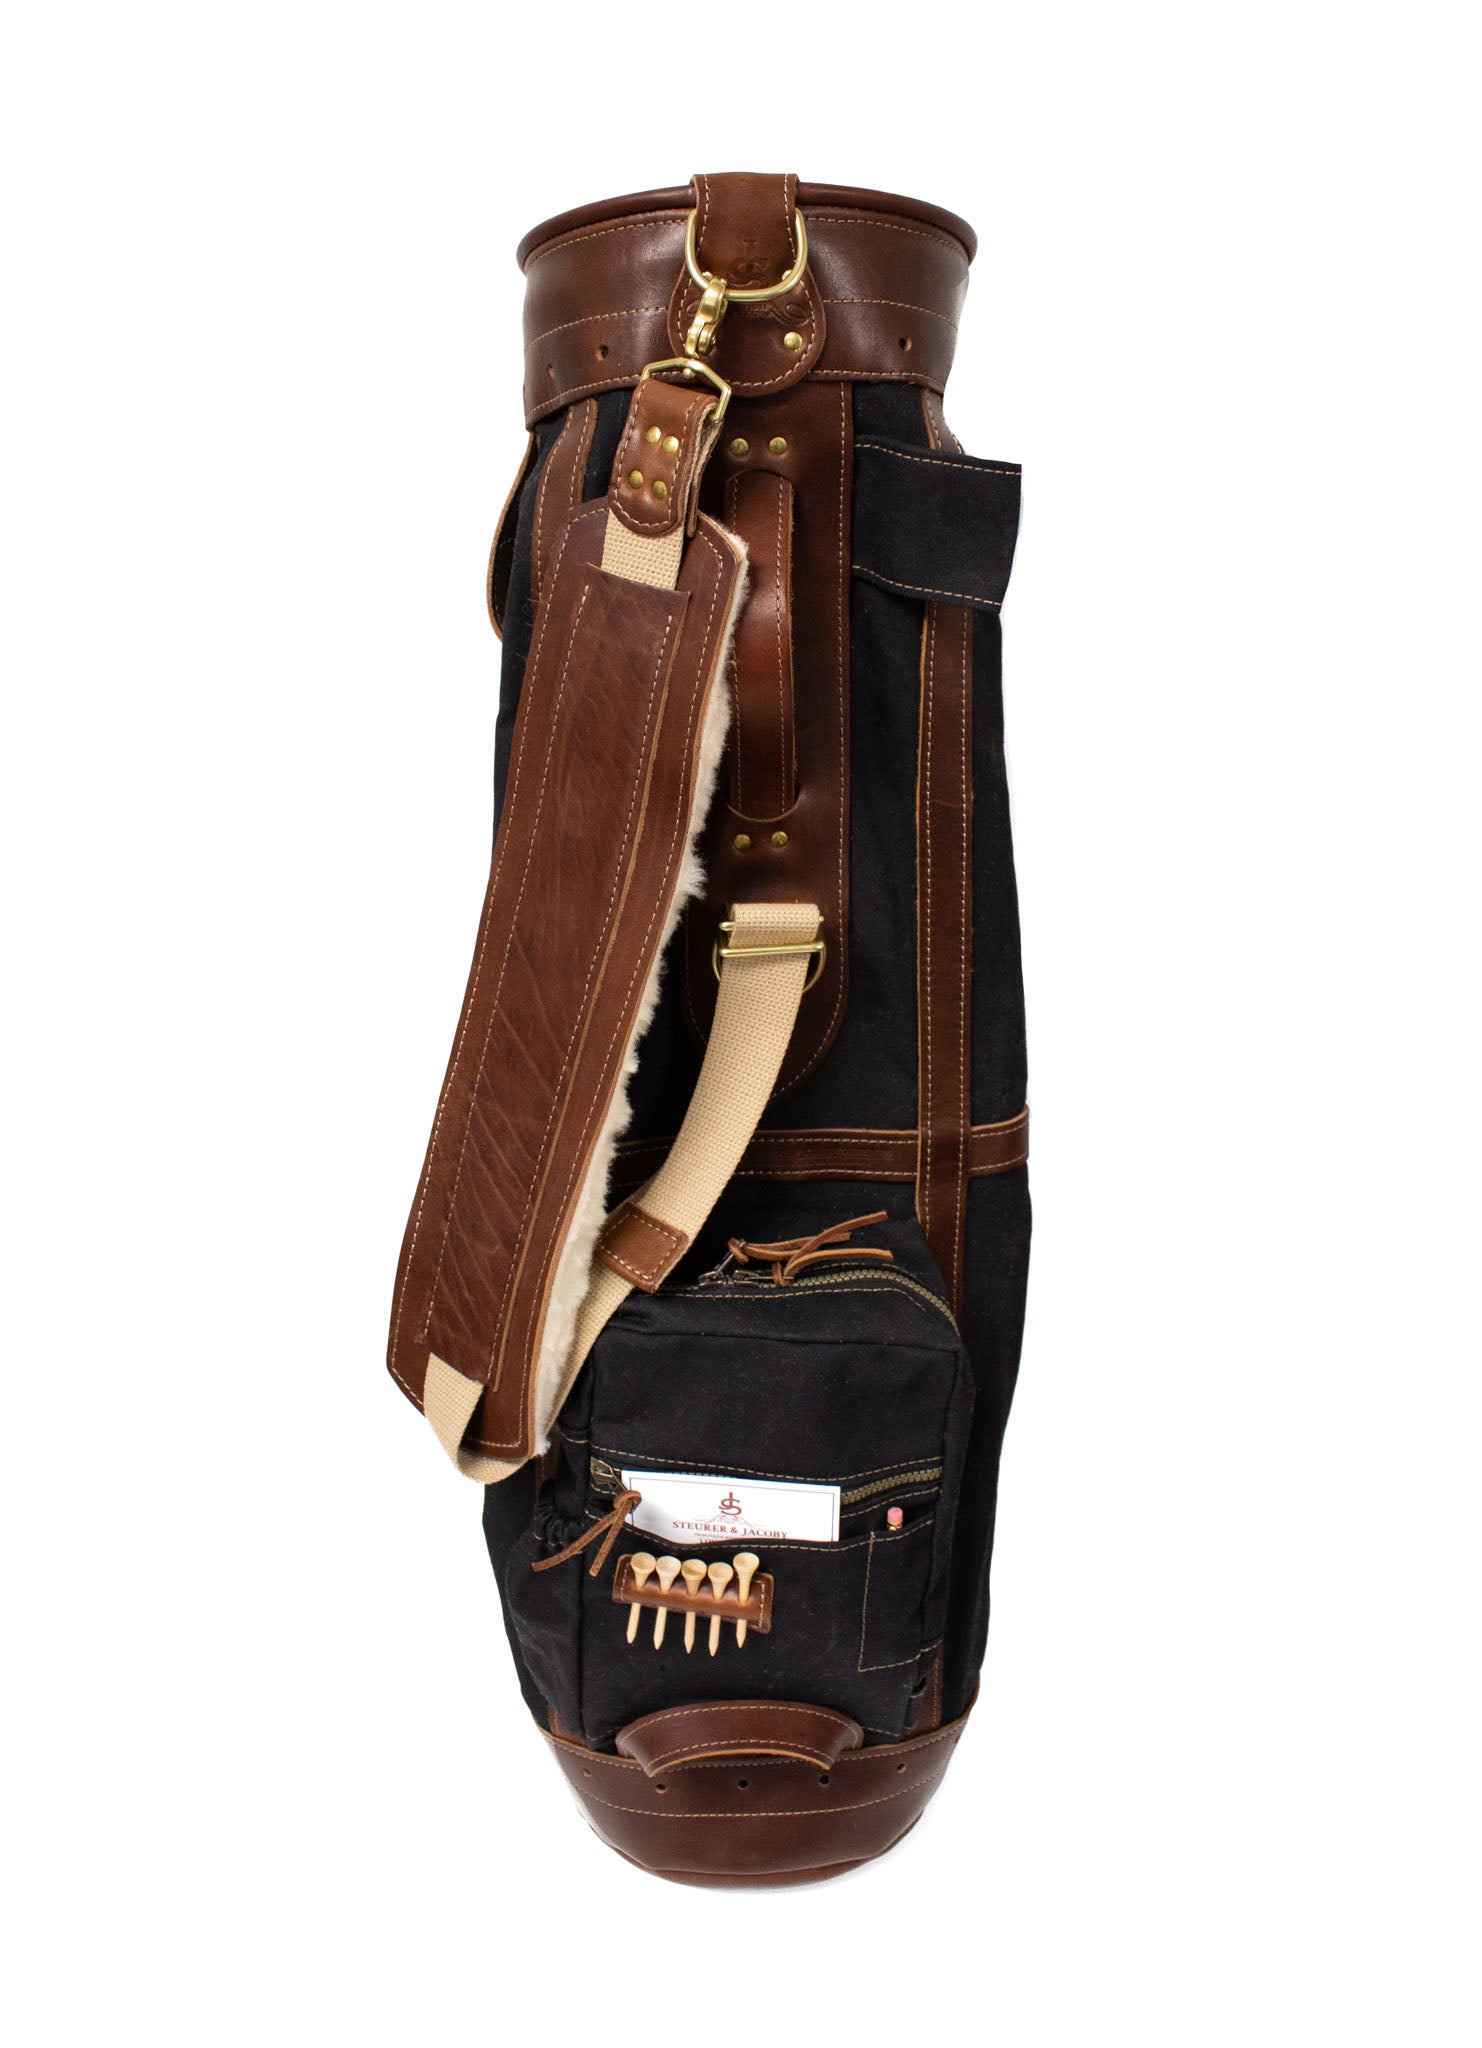 Black and Chestnut Leather Caddy Style Golf Bag- Steurer & Jacoby